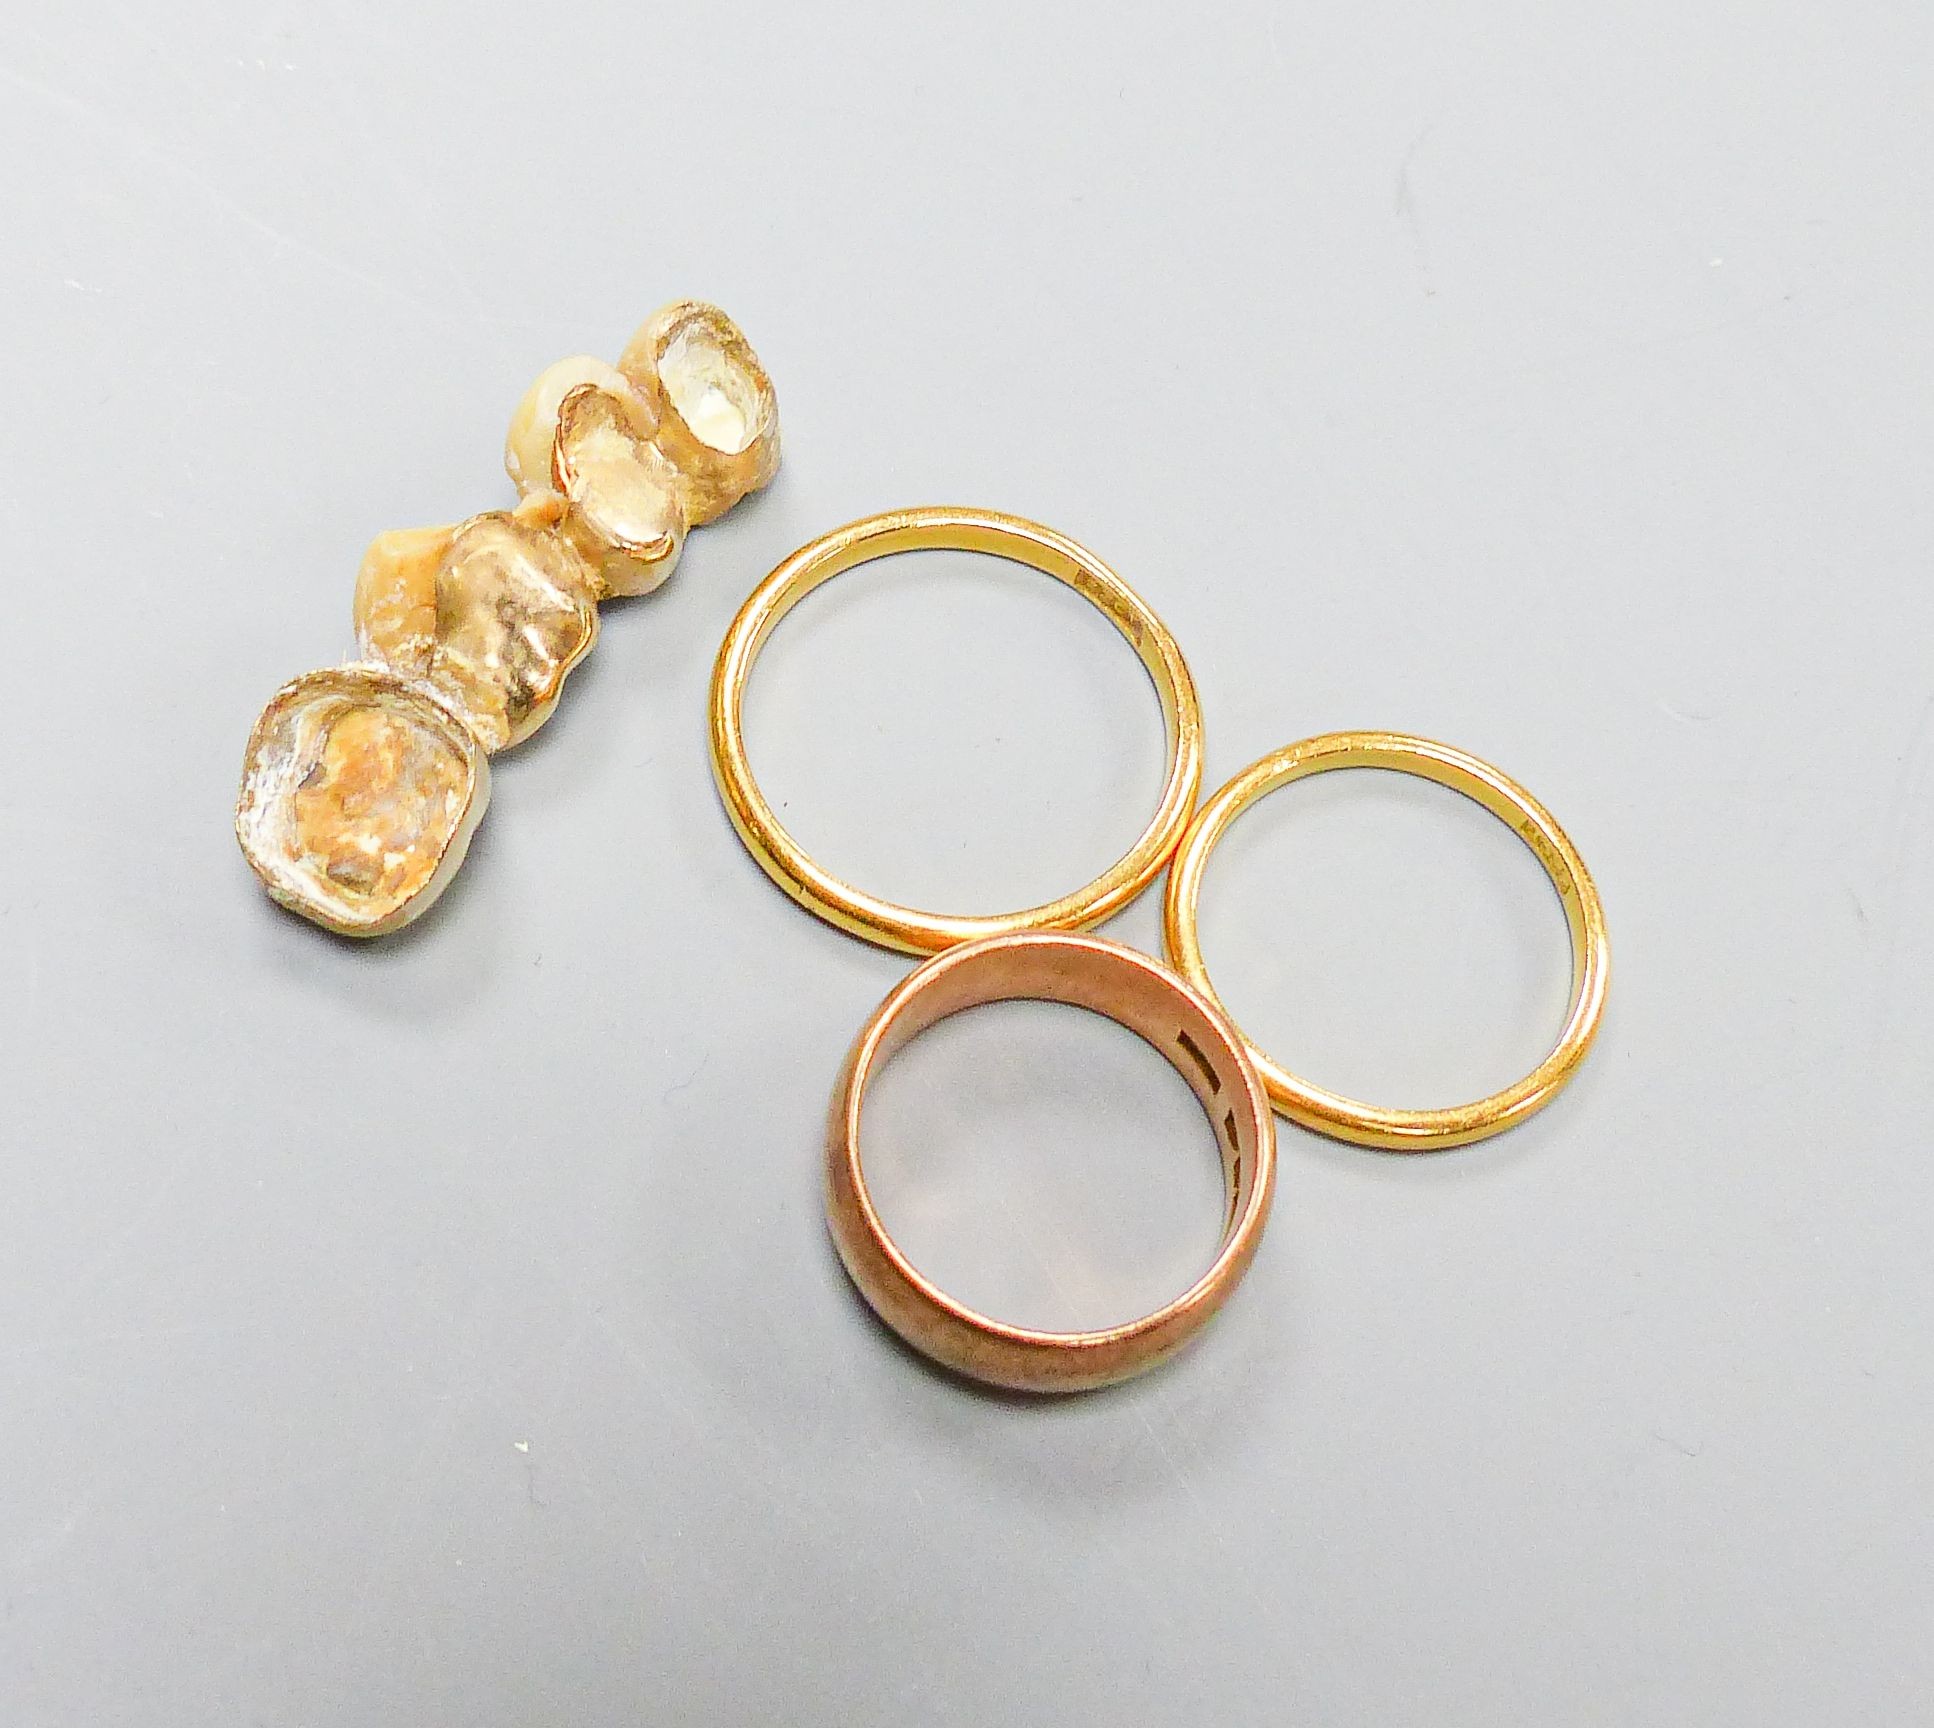 Two 22ct wedding rings, 5.7 grams, a 9ct rose gold wedding band 4.6 grams and four gold-mounted teeth.